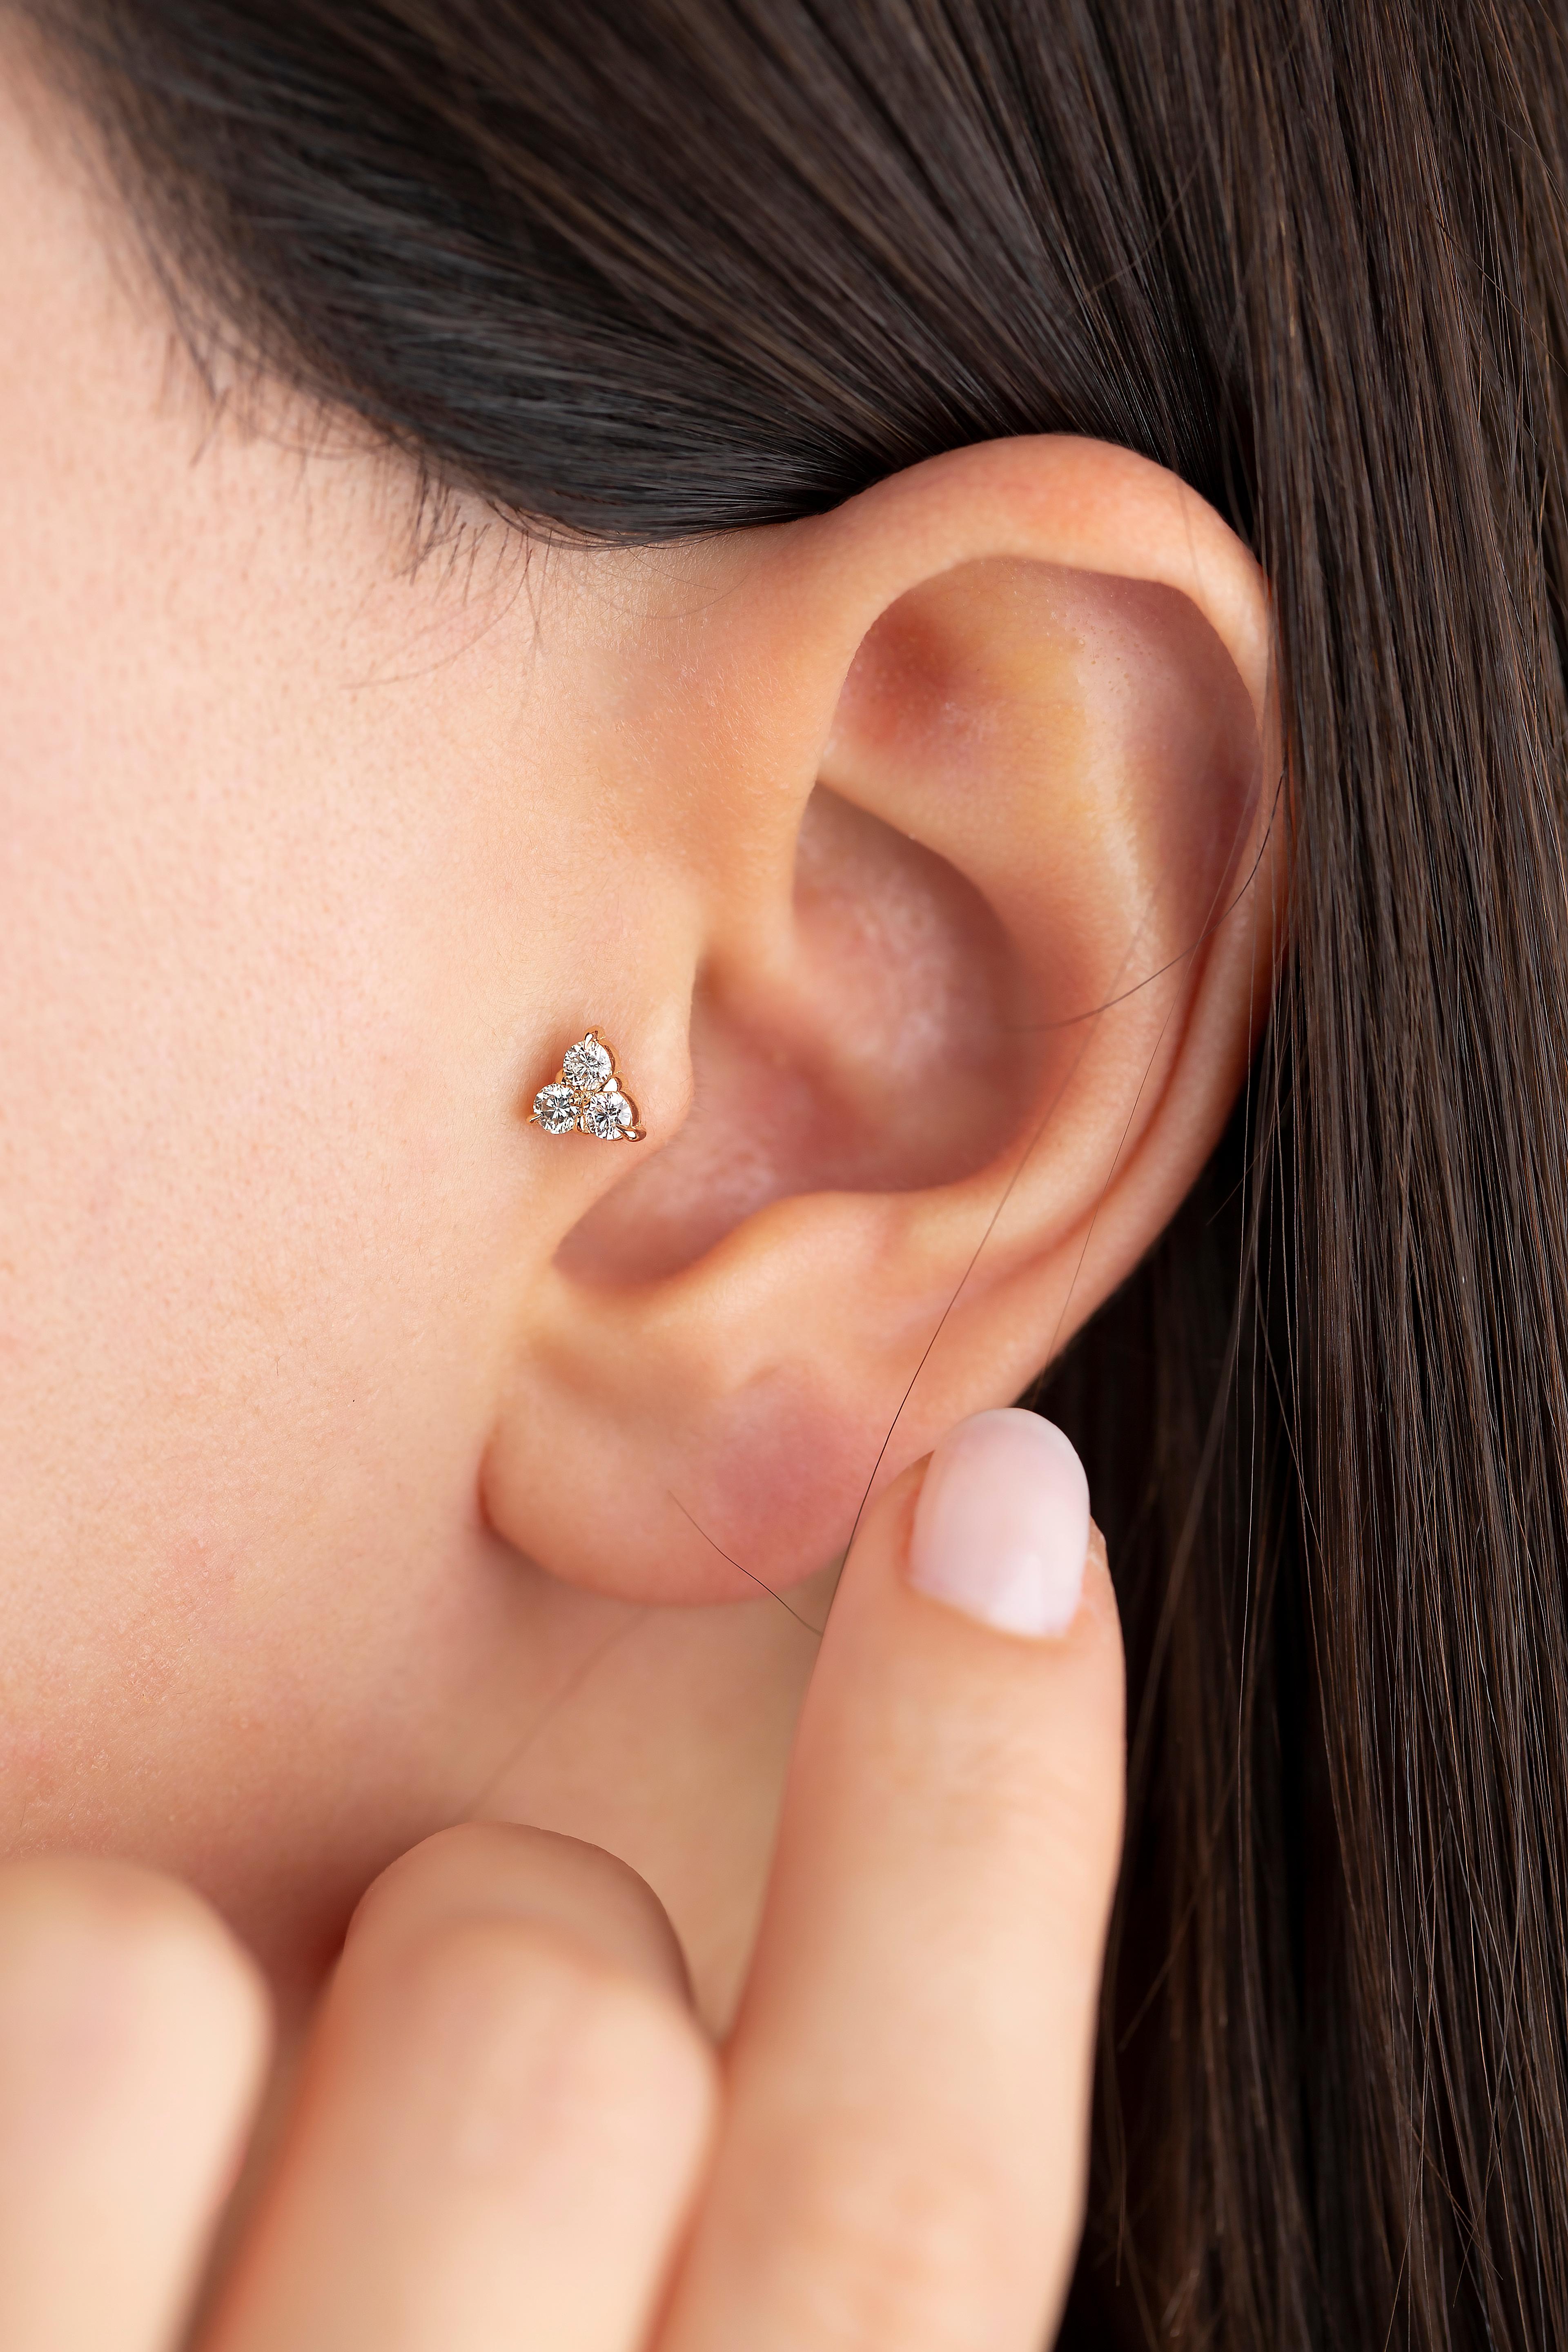 14K Gold 0.21 Ct Tria Diamonds Piercing, Gold 0.21 ct Triple Diamonds Earring

You can use the piercing as an earring too! Also this piercing is suitable for tragus, nose, helix, lobe, flat, medusa, monreo, labret and stud.

This piercing was made